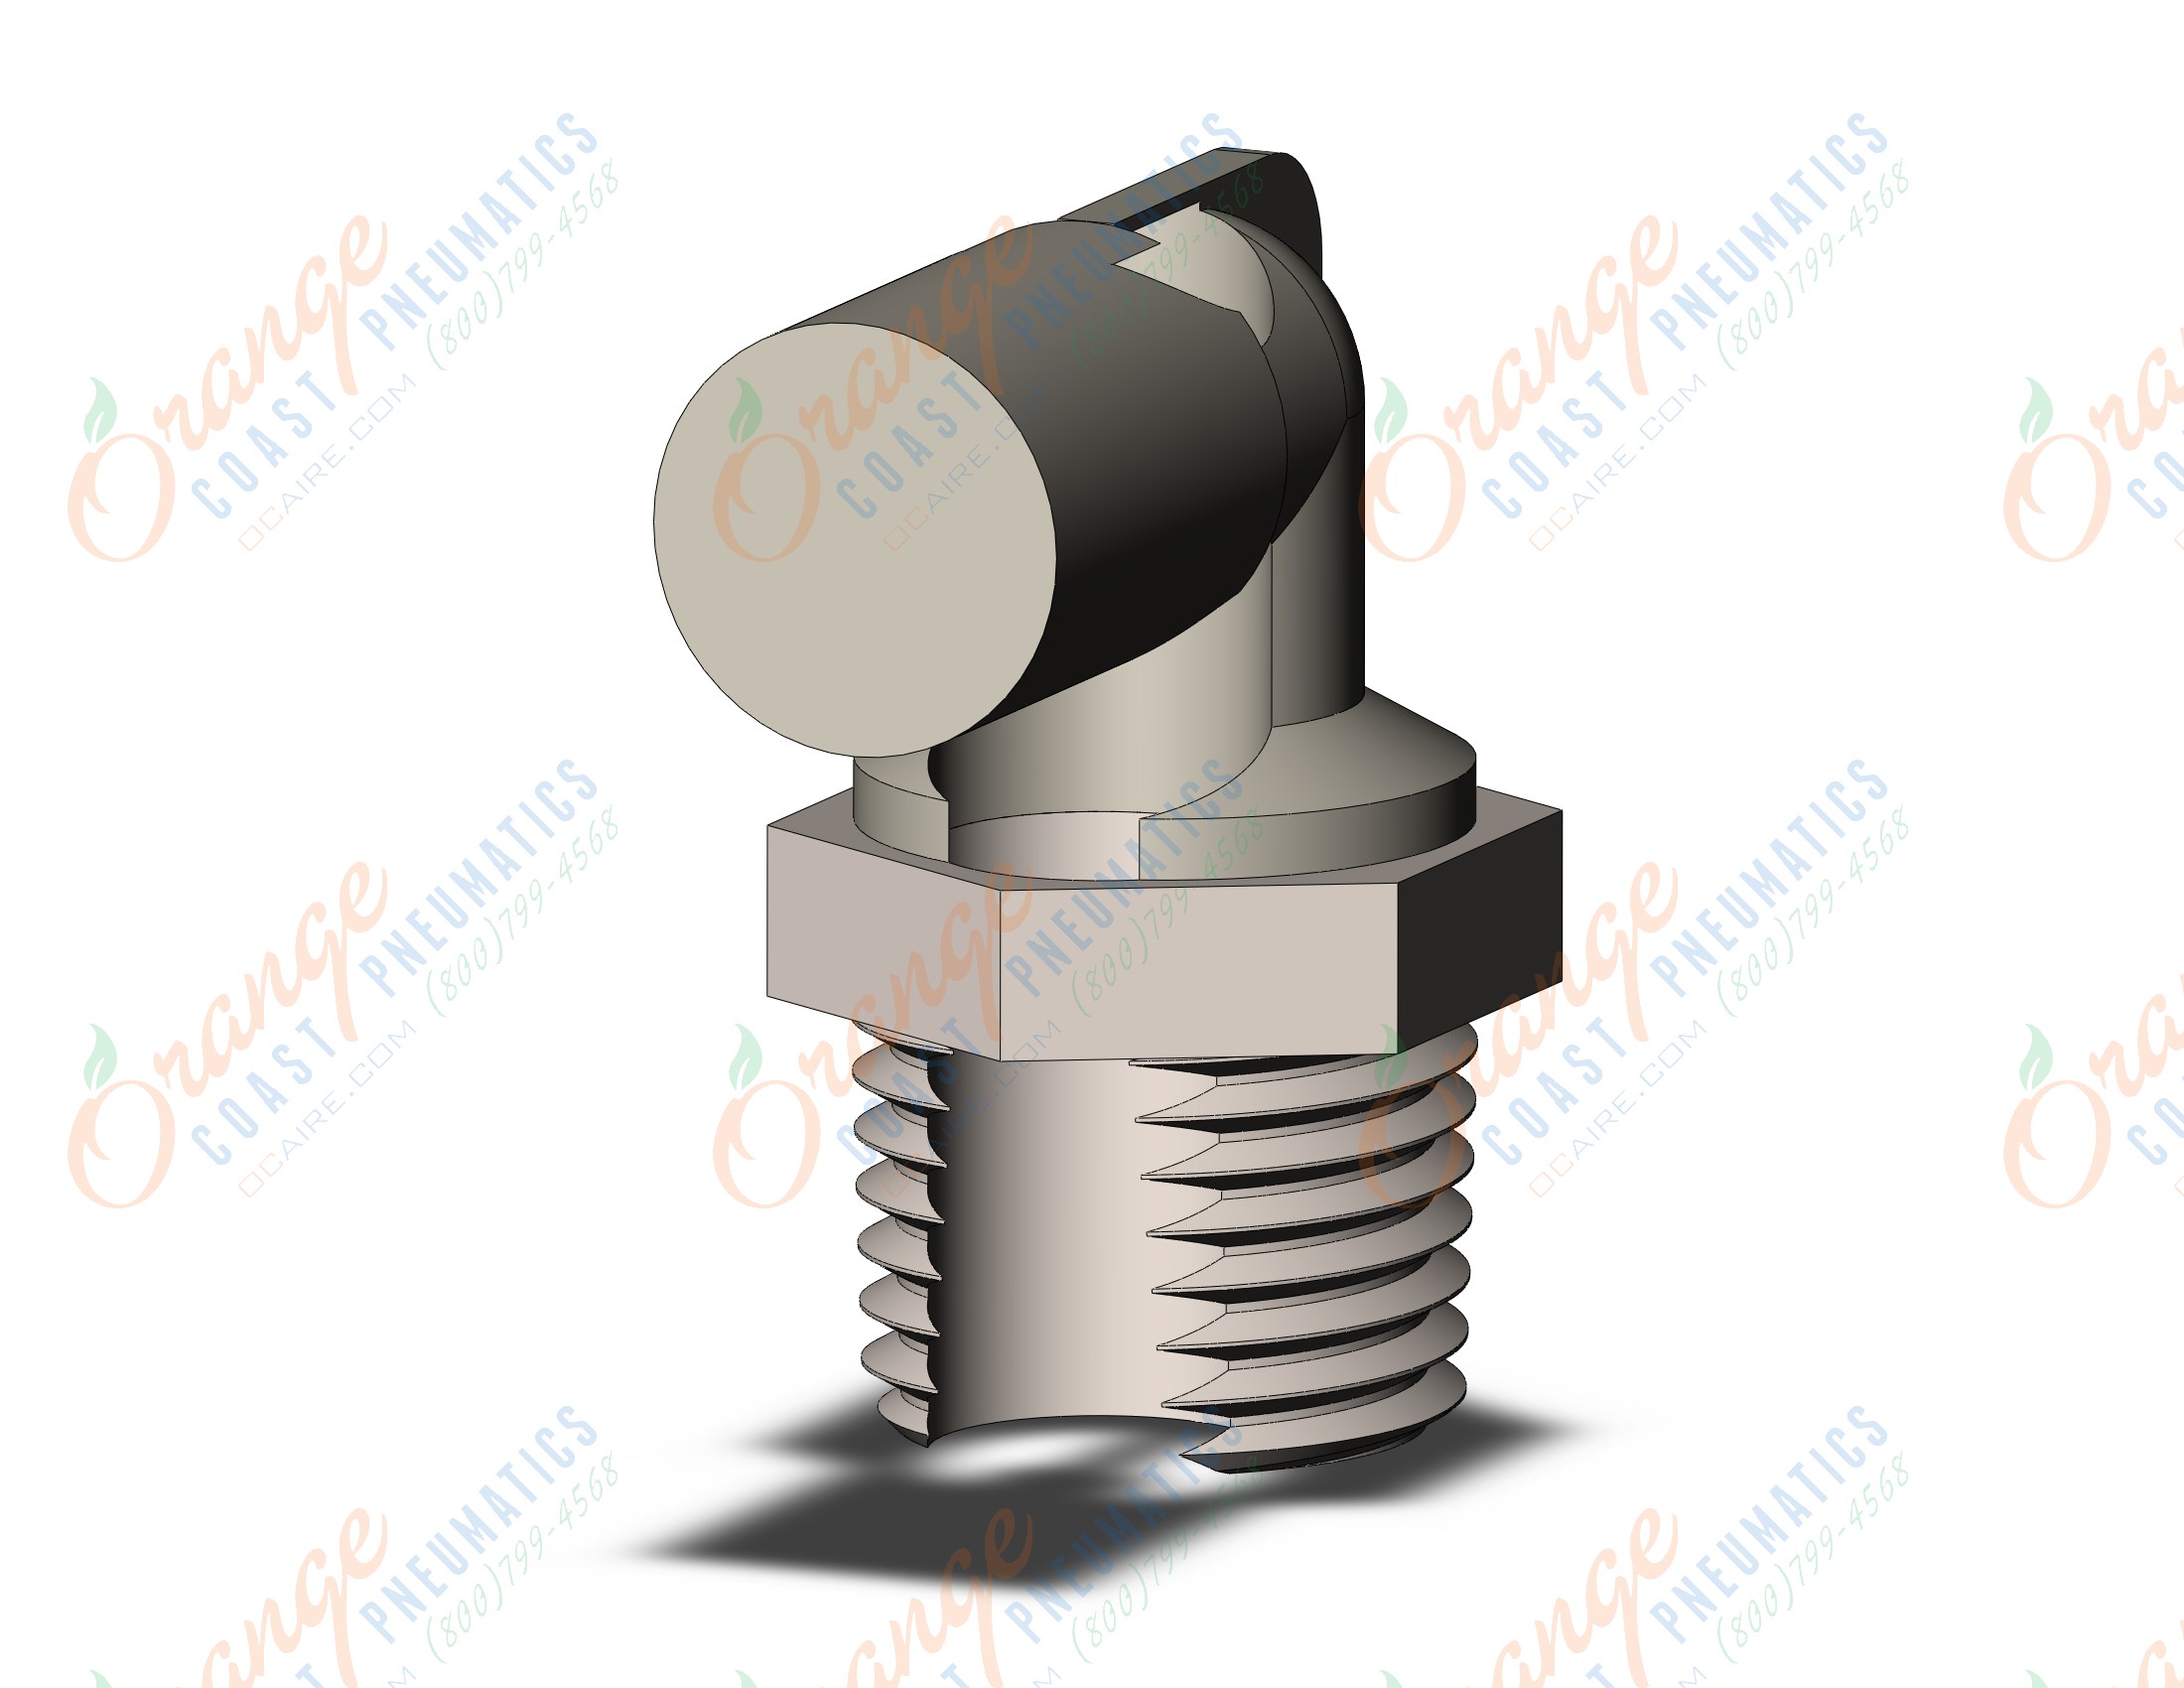 SMC KQ2L01-34N kq2 1/8, KQ2 FITTING (sold in packages of 10; price is per piece)